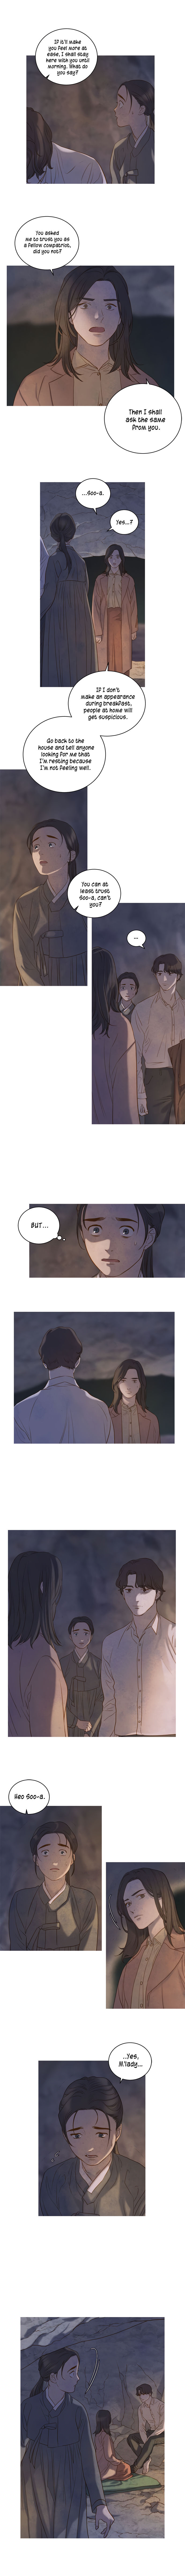 Gorae Byul - The Gyeongseong Mermaid - Chapter 5 Page 6